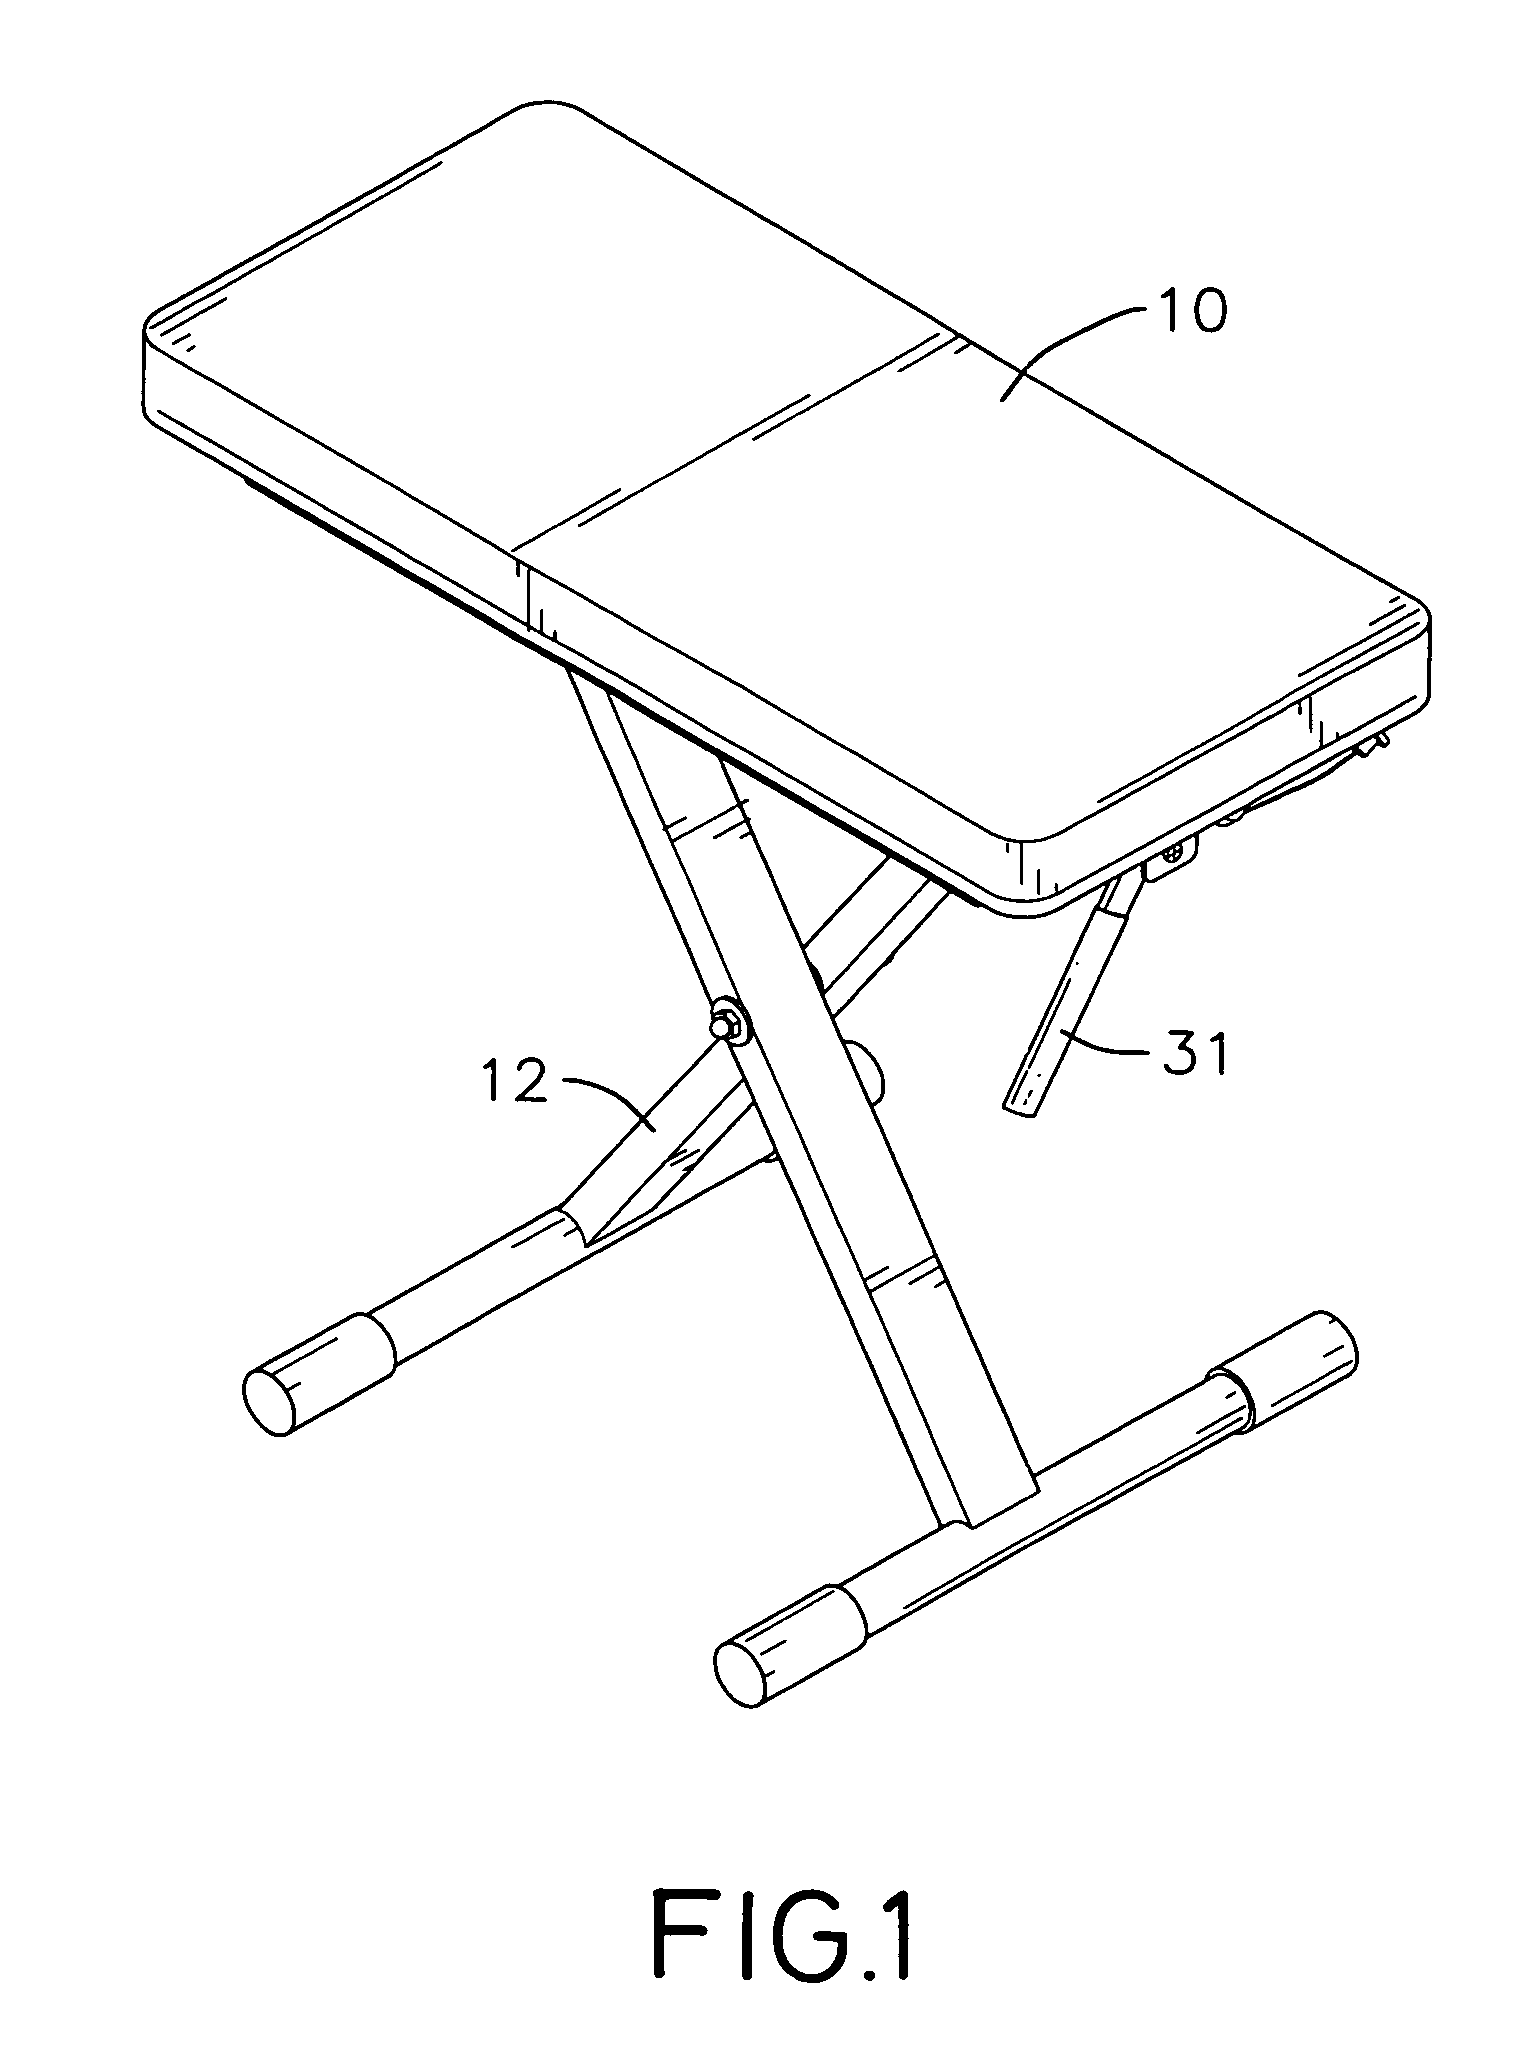 Height adjustable chair for a keyboard instrument